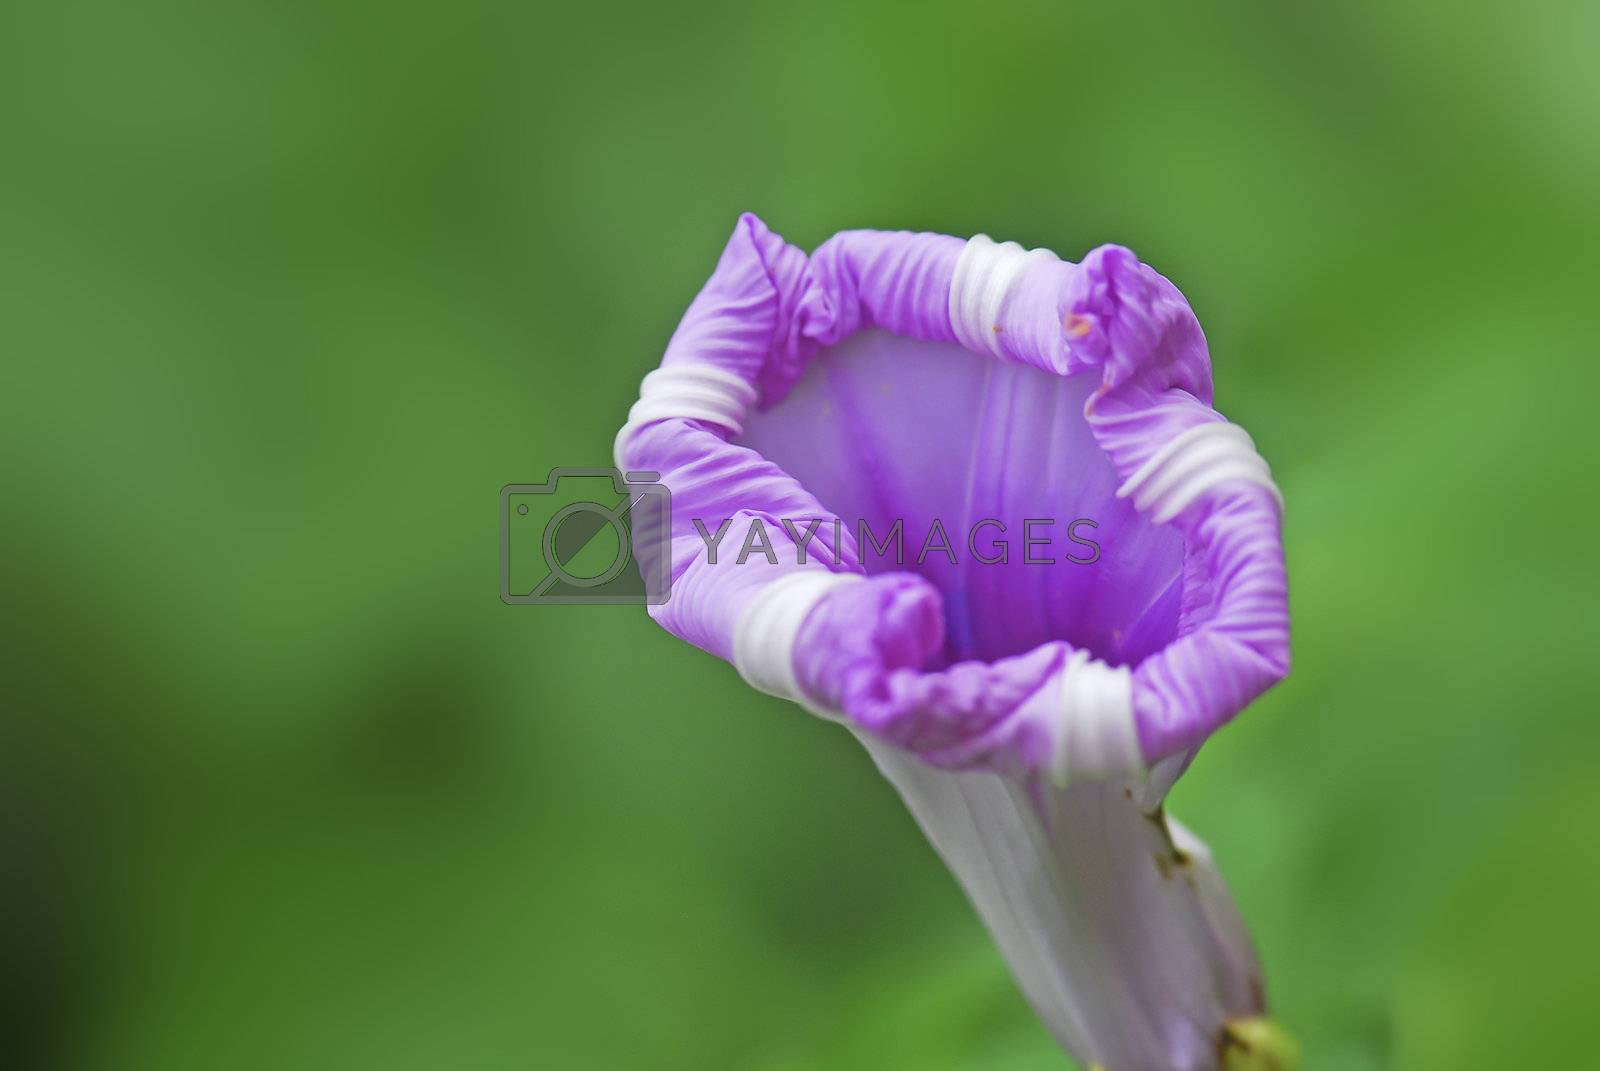 Royalty free image of morning glory by xfdly5